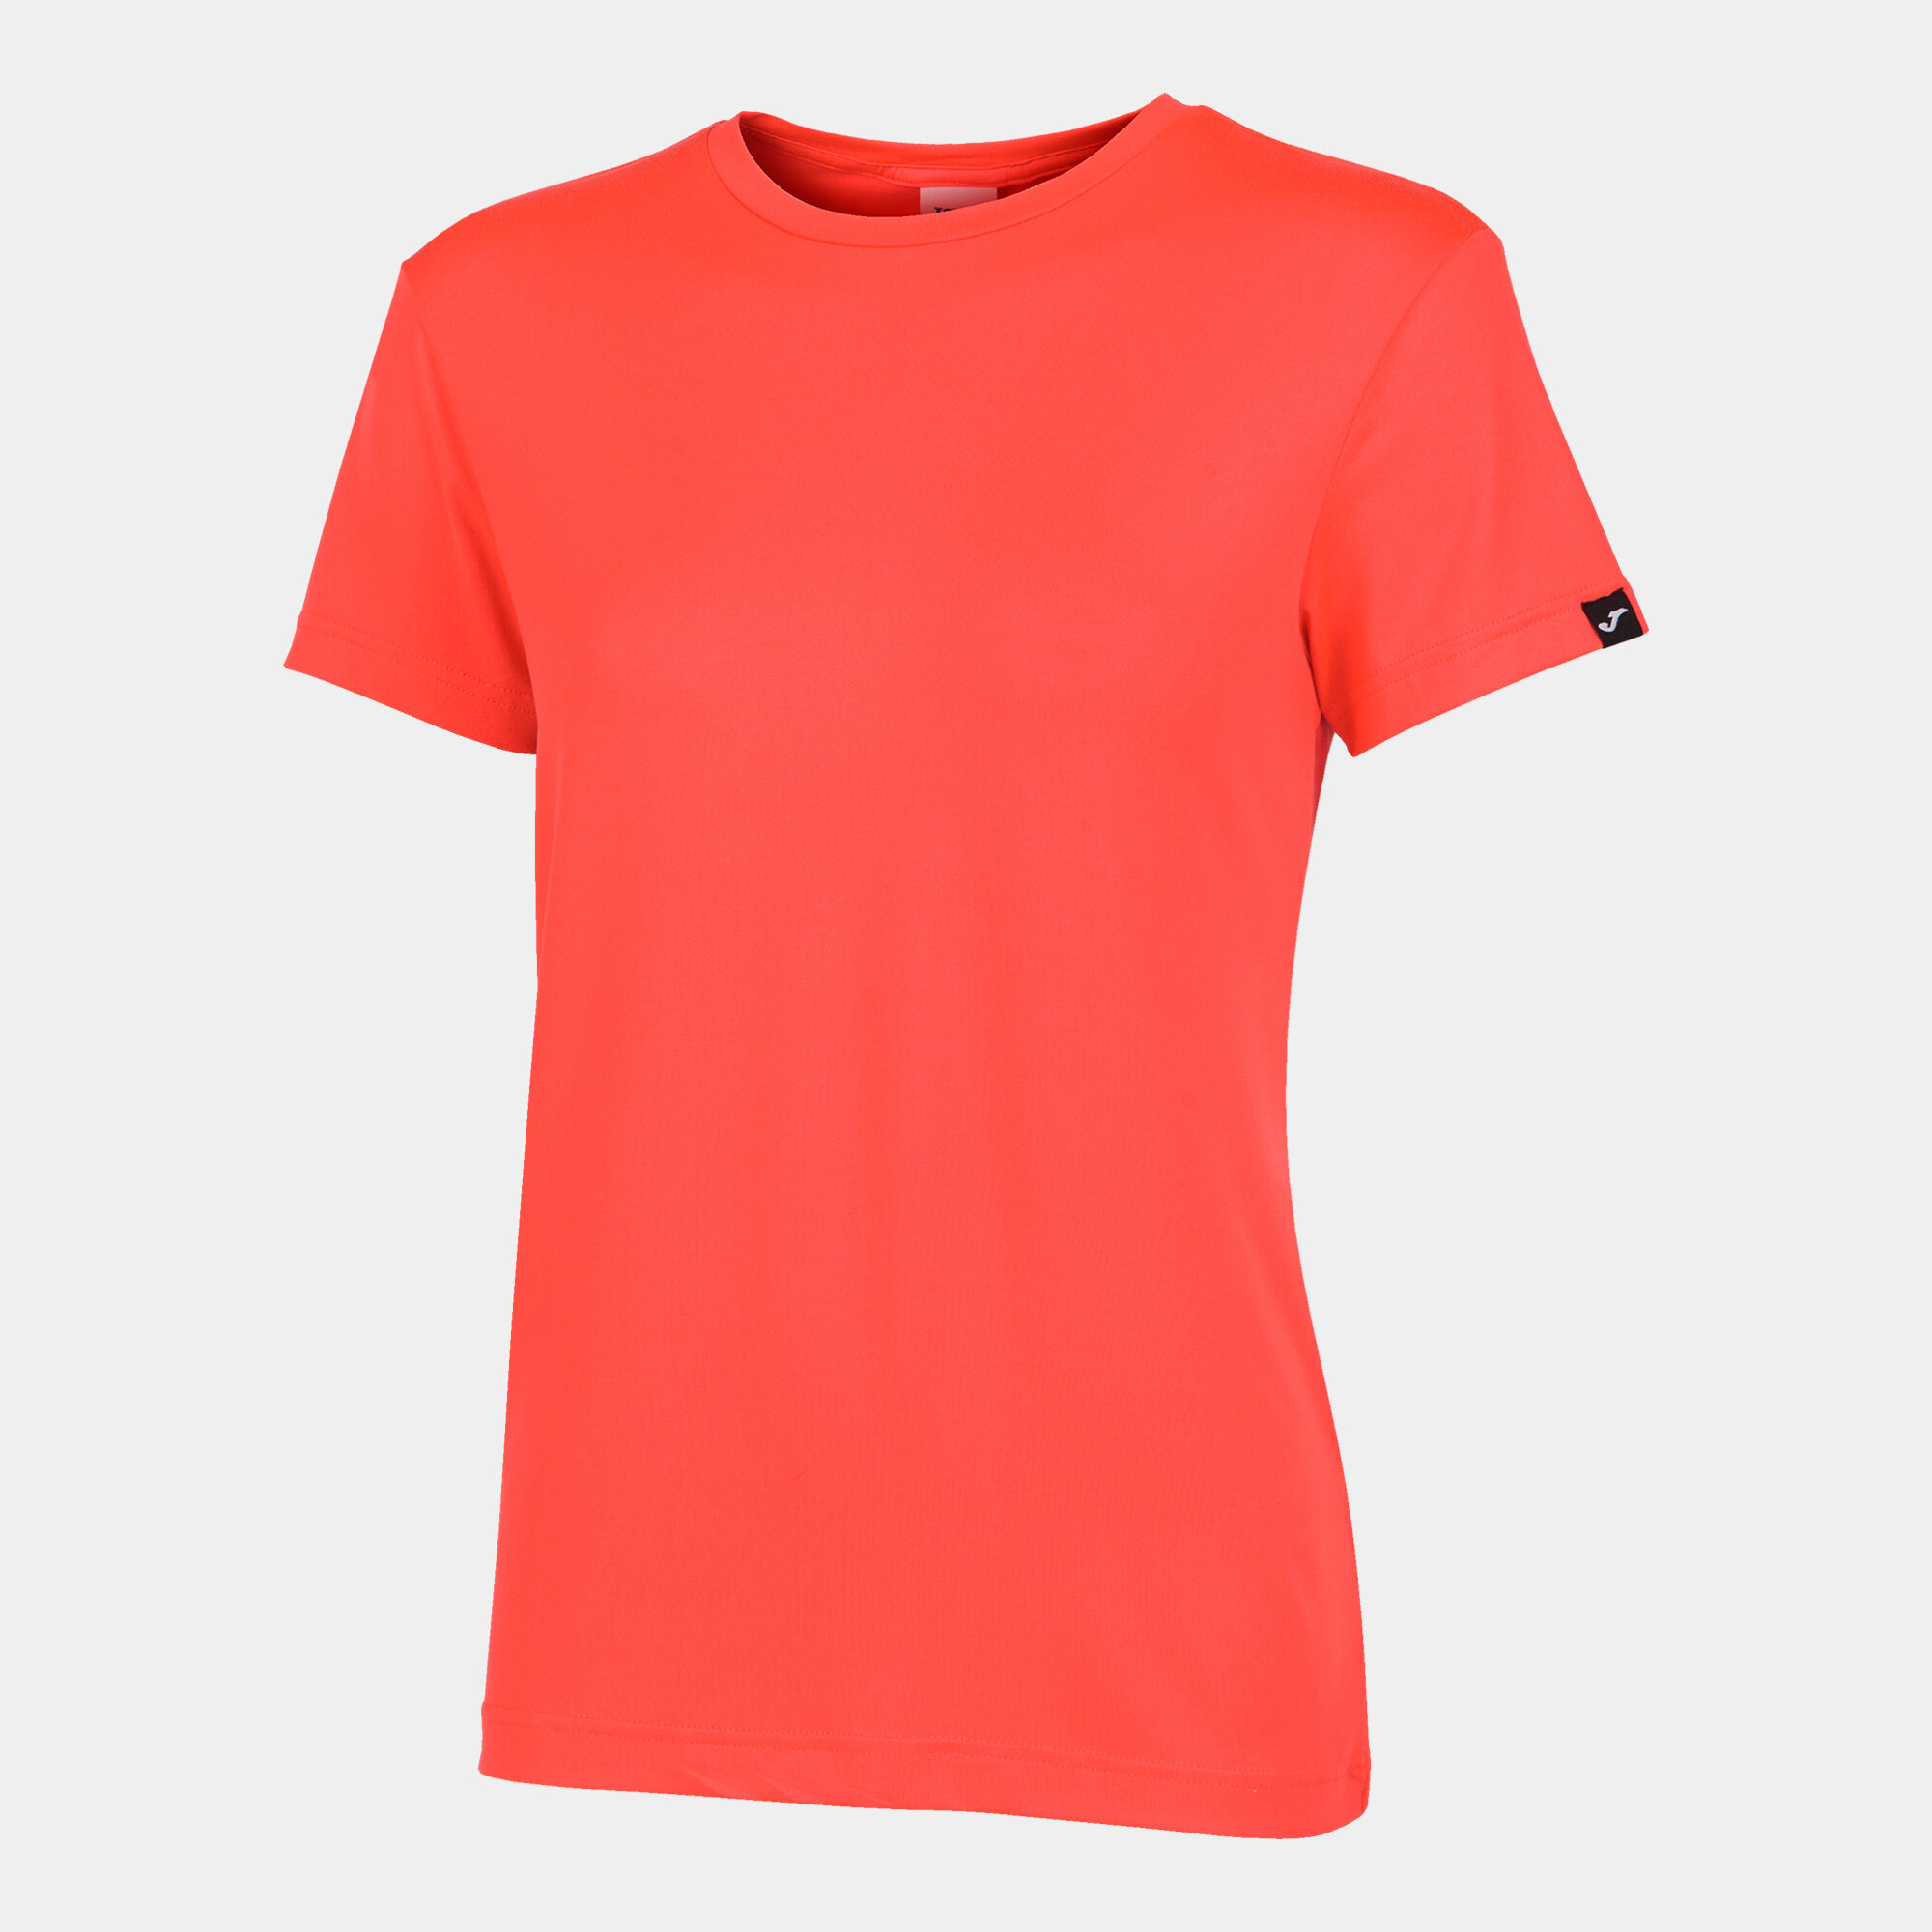 MAILLOT MANCHES COURTES FEMME TORNEO CORAIL FLUO